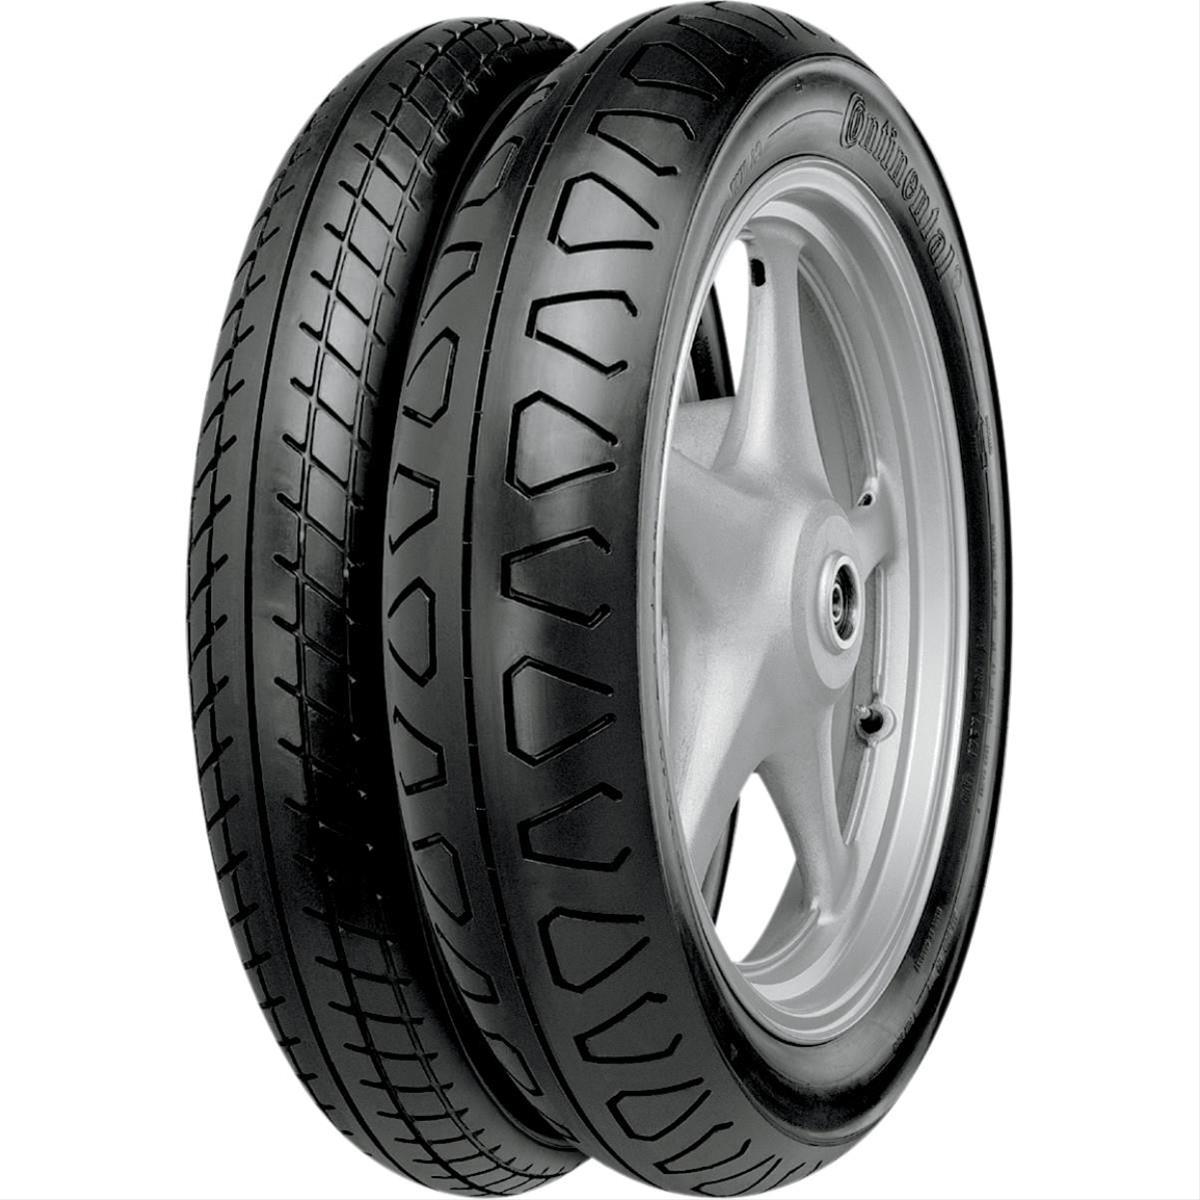 Continental Motorcycle Tires 02491070000 Continental Tire